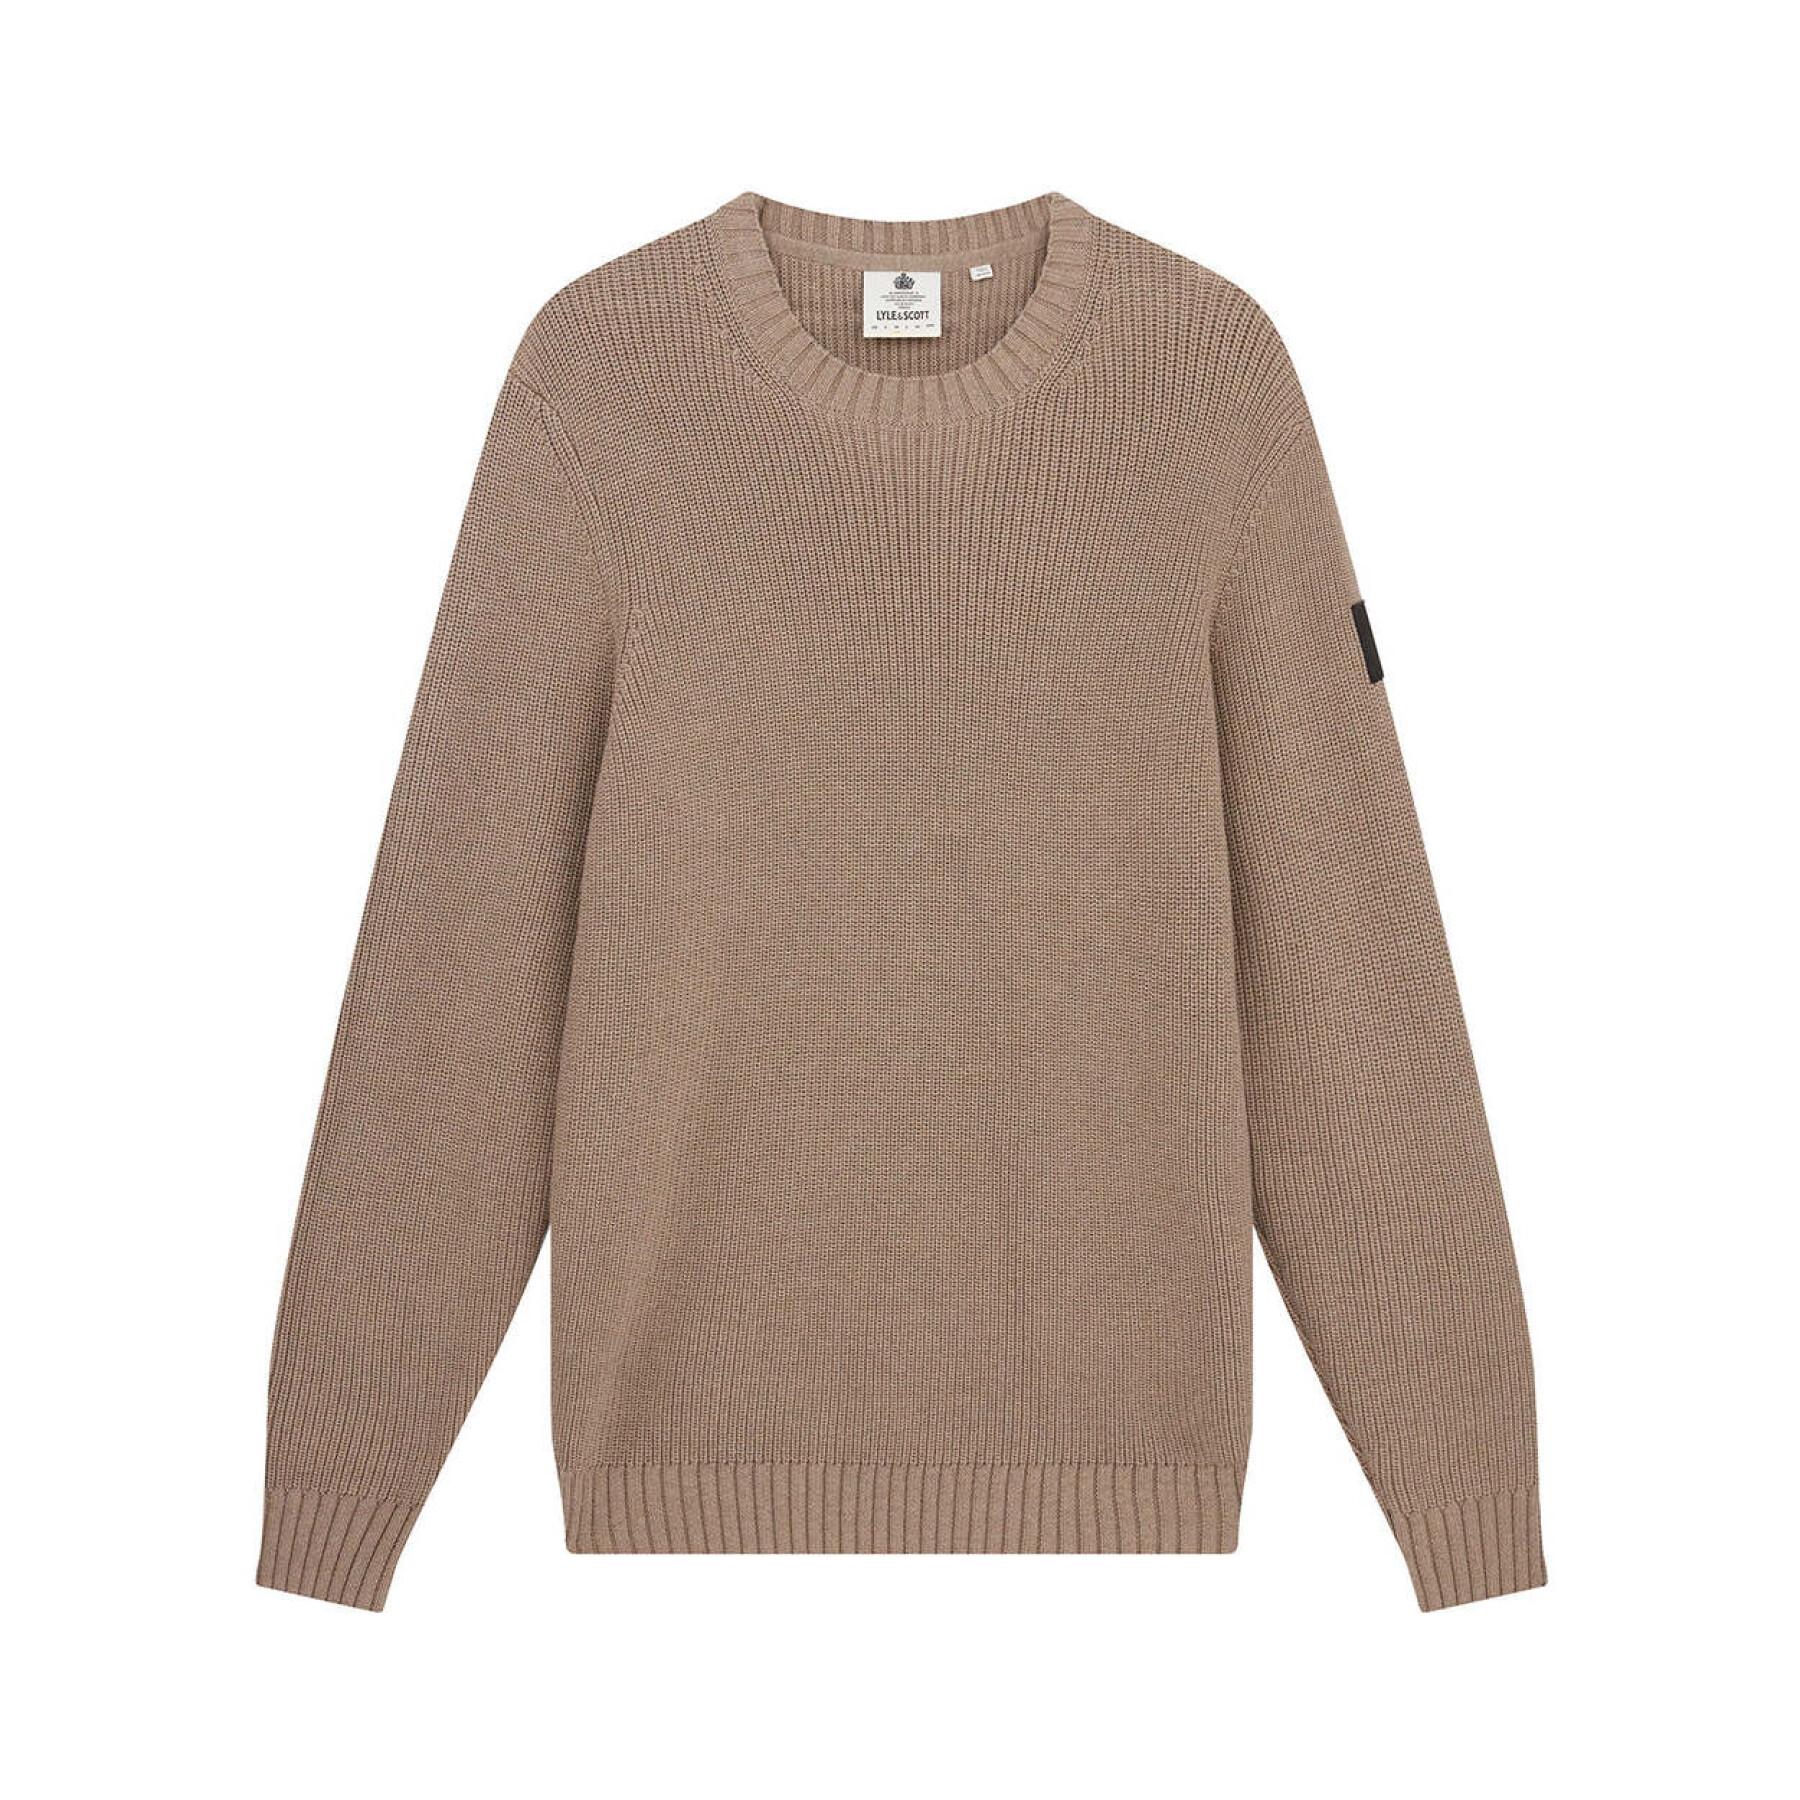 Contrasting ribbed round neck sweater Lyle & Scott